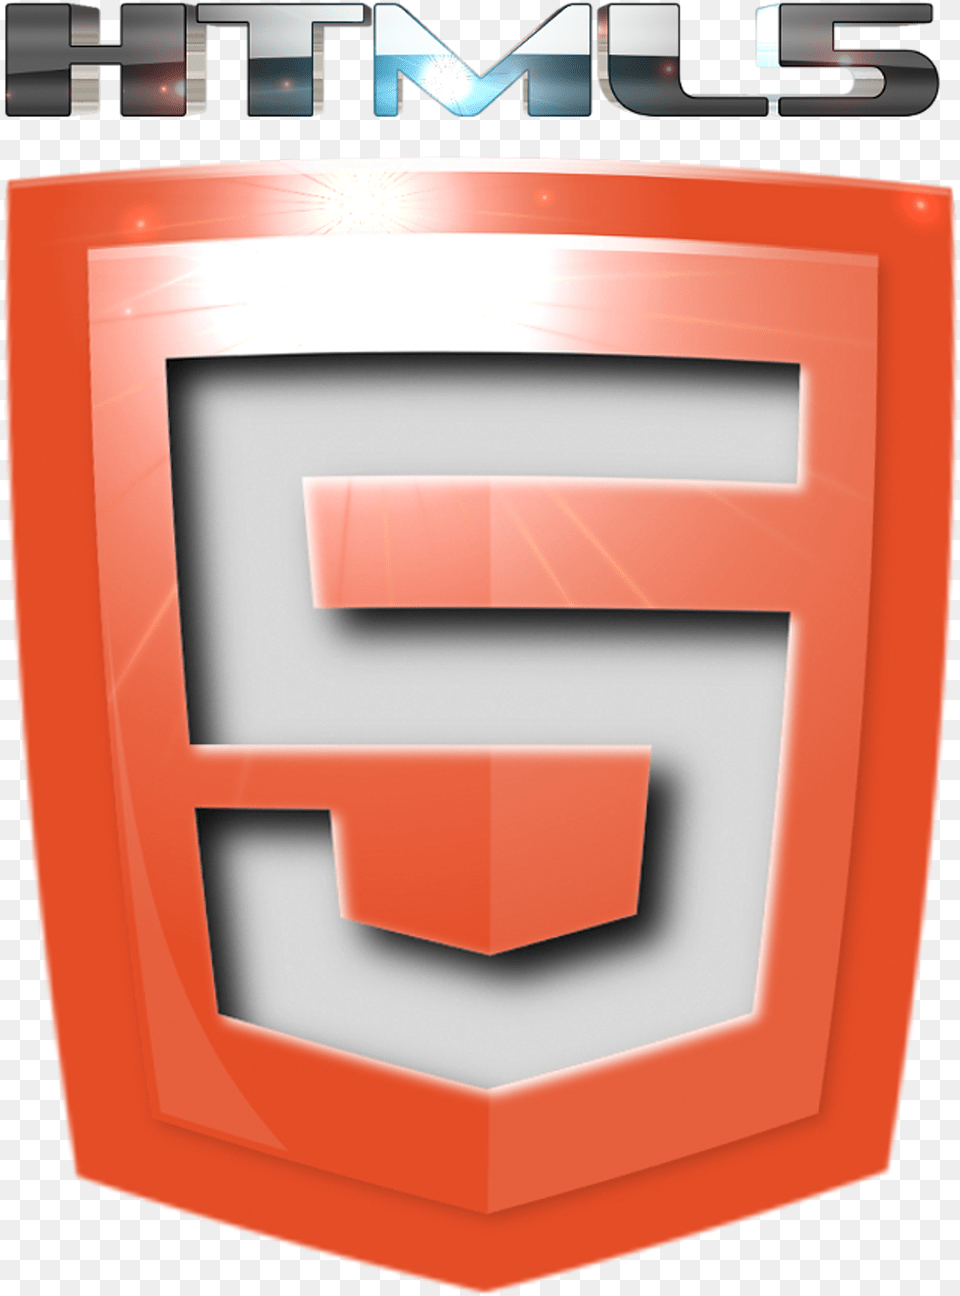 George Bayley Html5, Armor, Mailbox, Shield Png